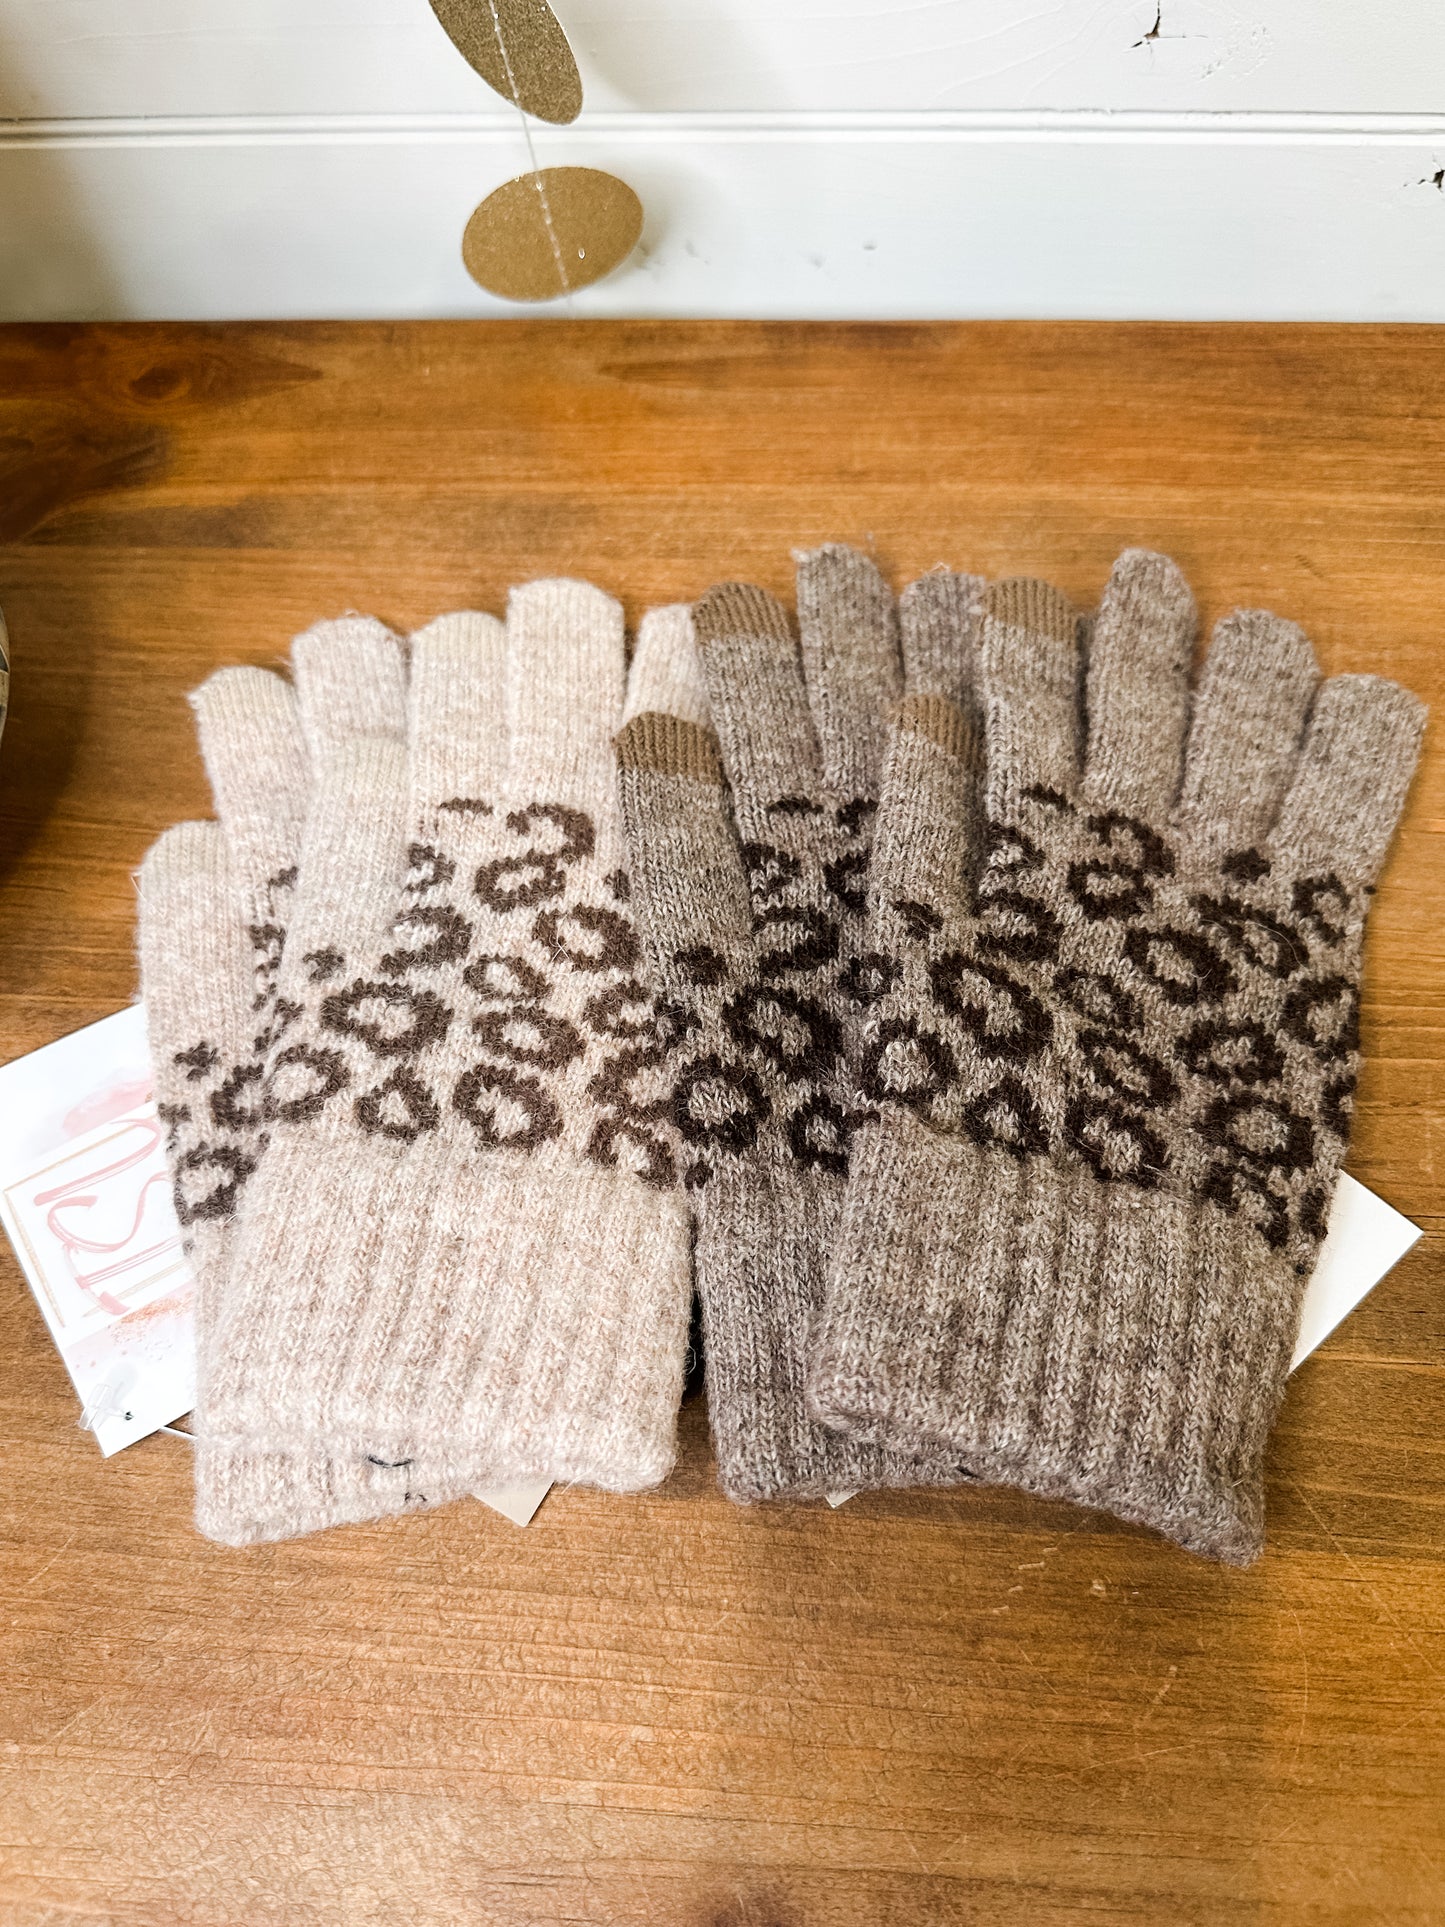 Knit Smart Touch Gloves